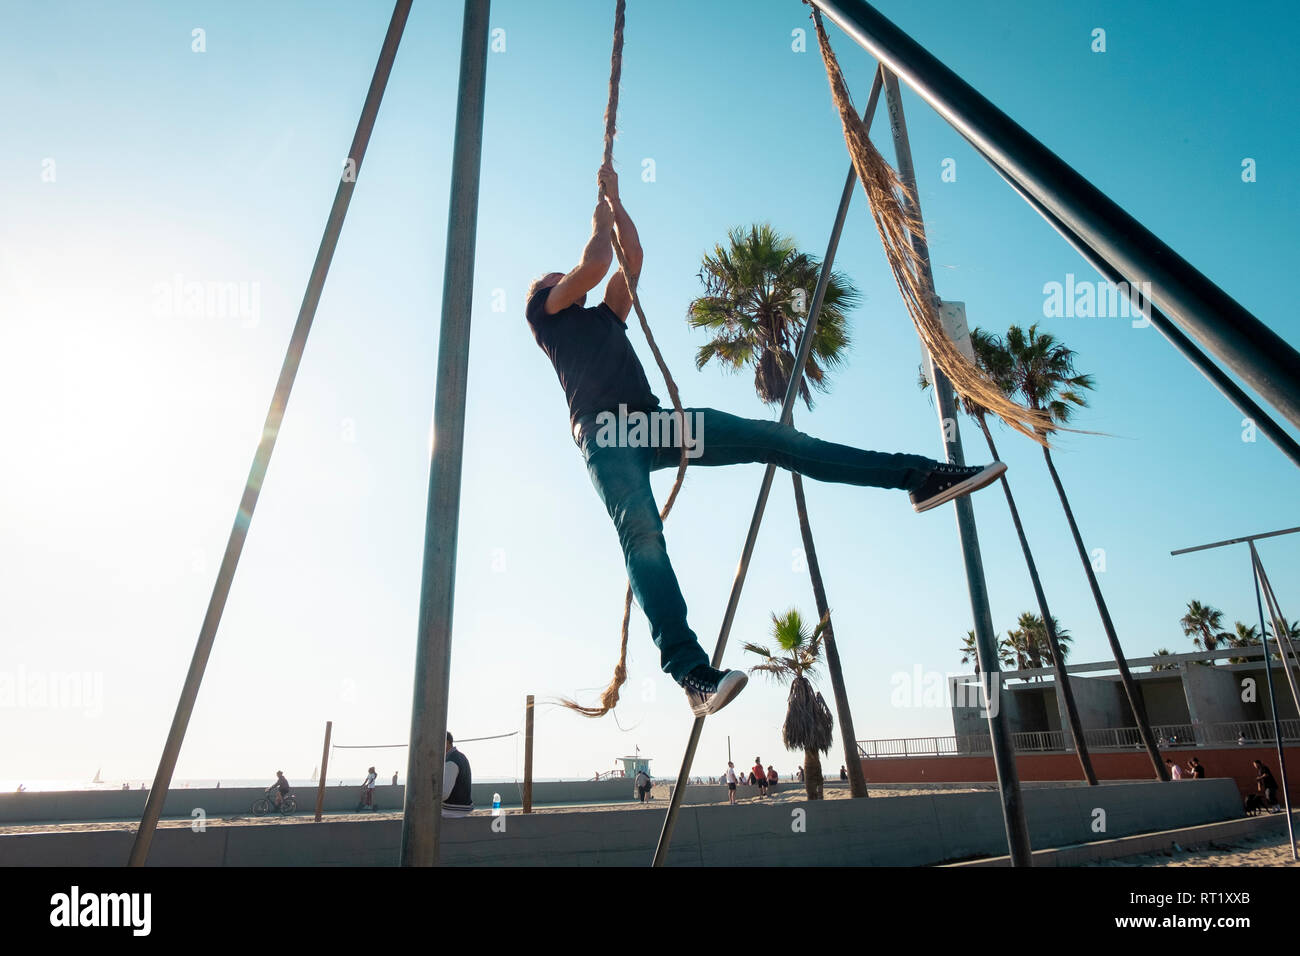 USA, California, Los Angeles, Venice, Man on the rope at Muscle Beach Stock Photo